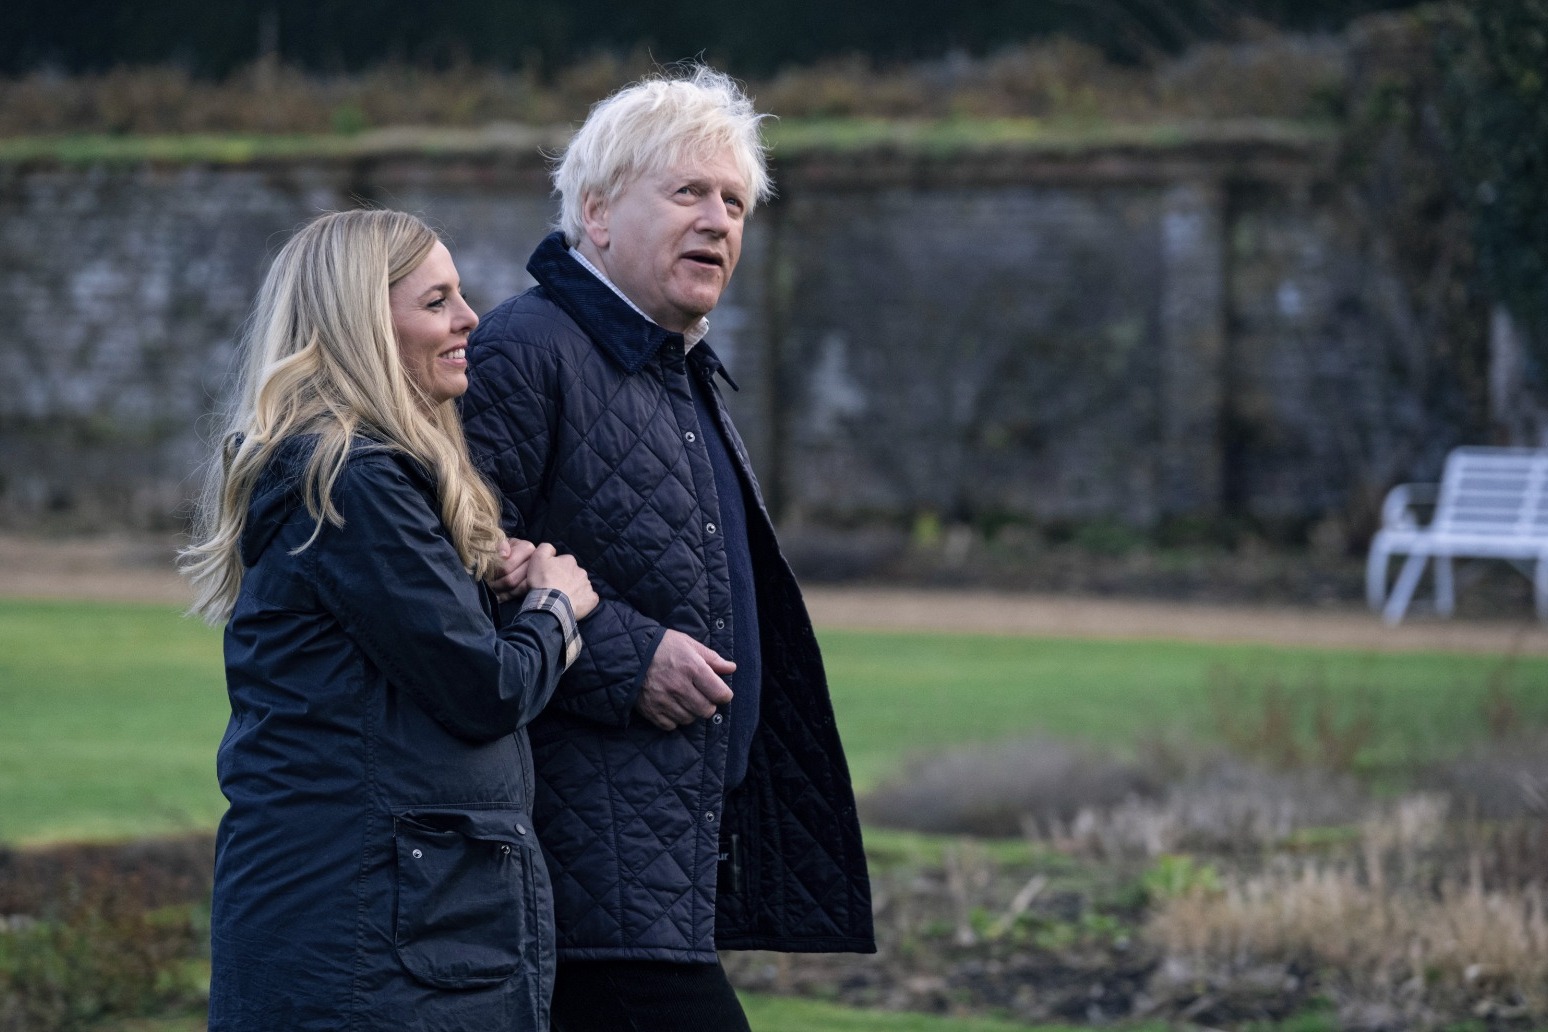 Sir Kenneth Branagh shows the PM’s growing concern for Covid in new drama teaser 